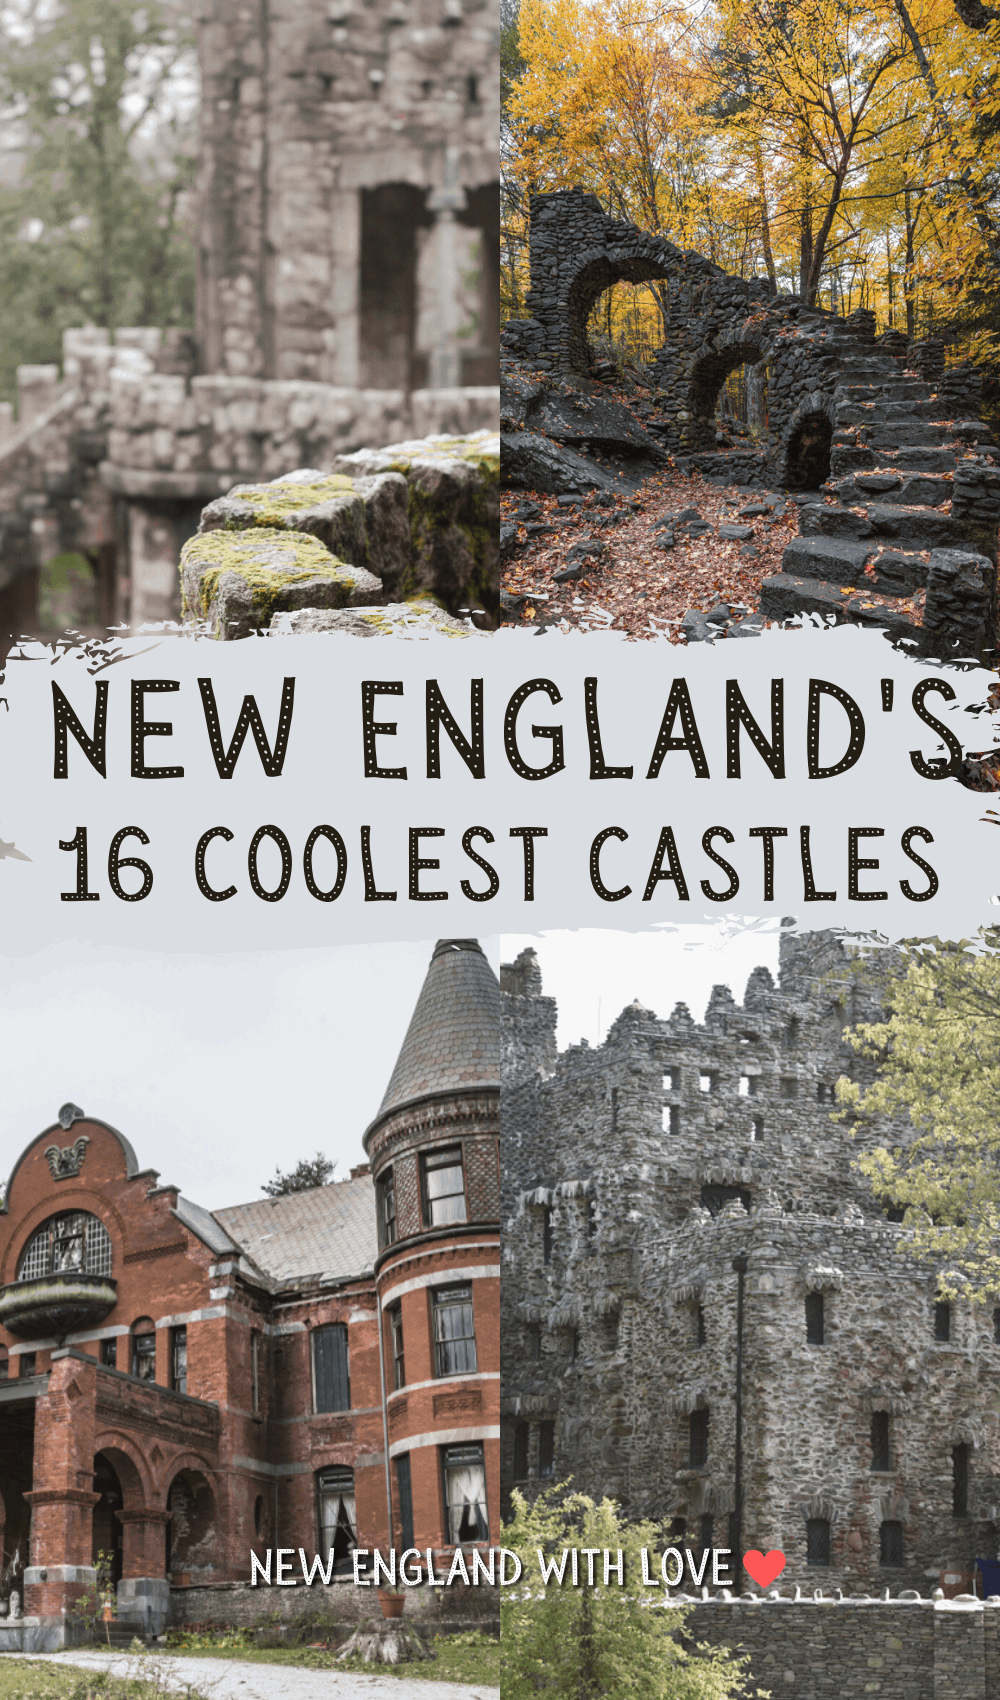 Pinterest graphic reading "NEW ENGLAND'S 16 COOLEST CASTLES"